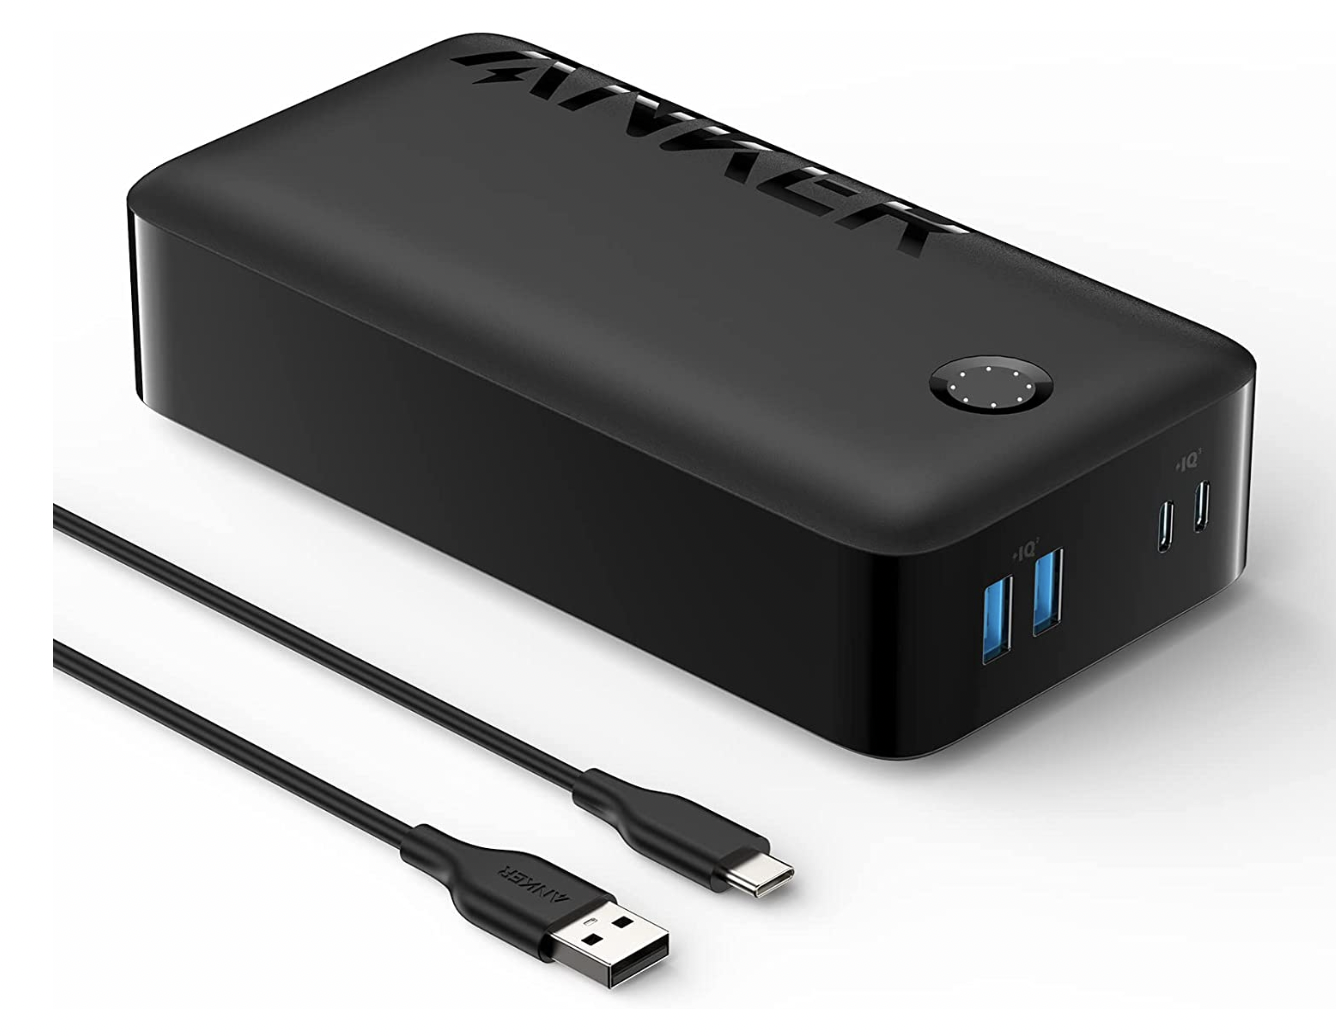 Anker Power Bank, 347 Portable Charger (PowerCore 40K), 40,000mAh Battery Pack with USB-C High-Speed Charging, For iPhone 13 / Pro/Pro Max/mini, Samsung Galaxy, iPad, AirPods, and More